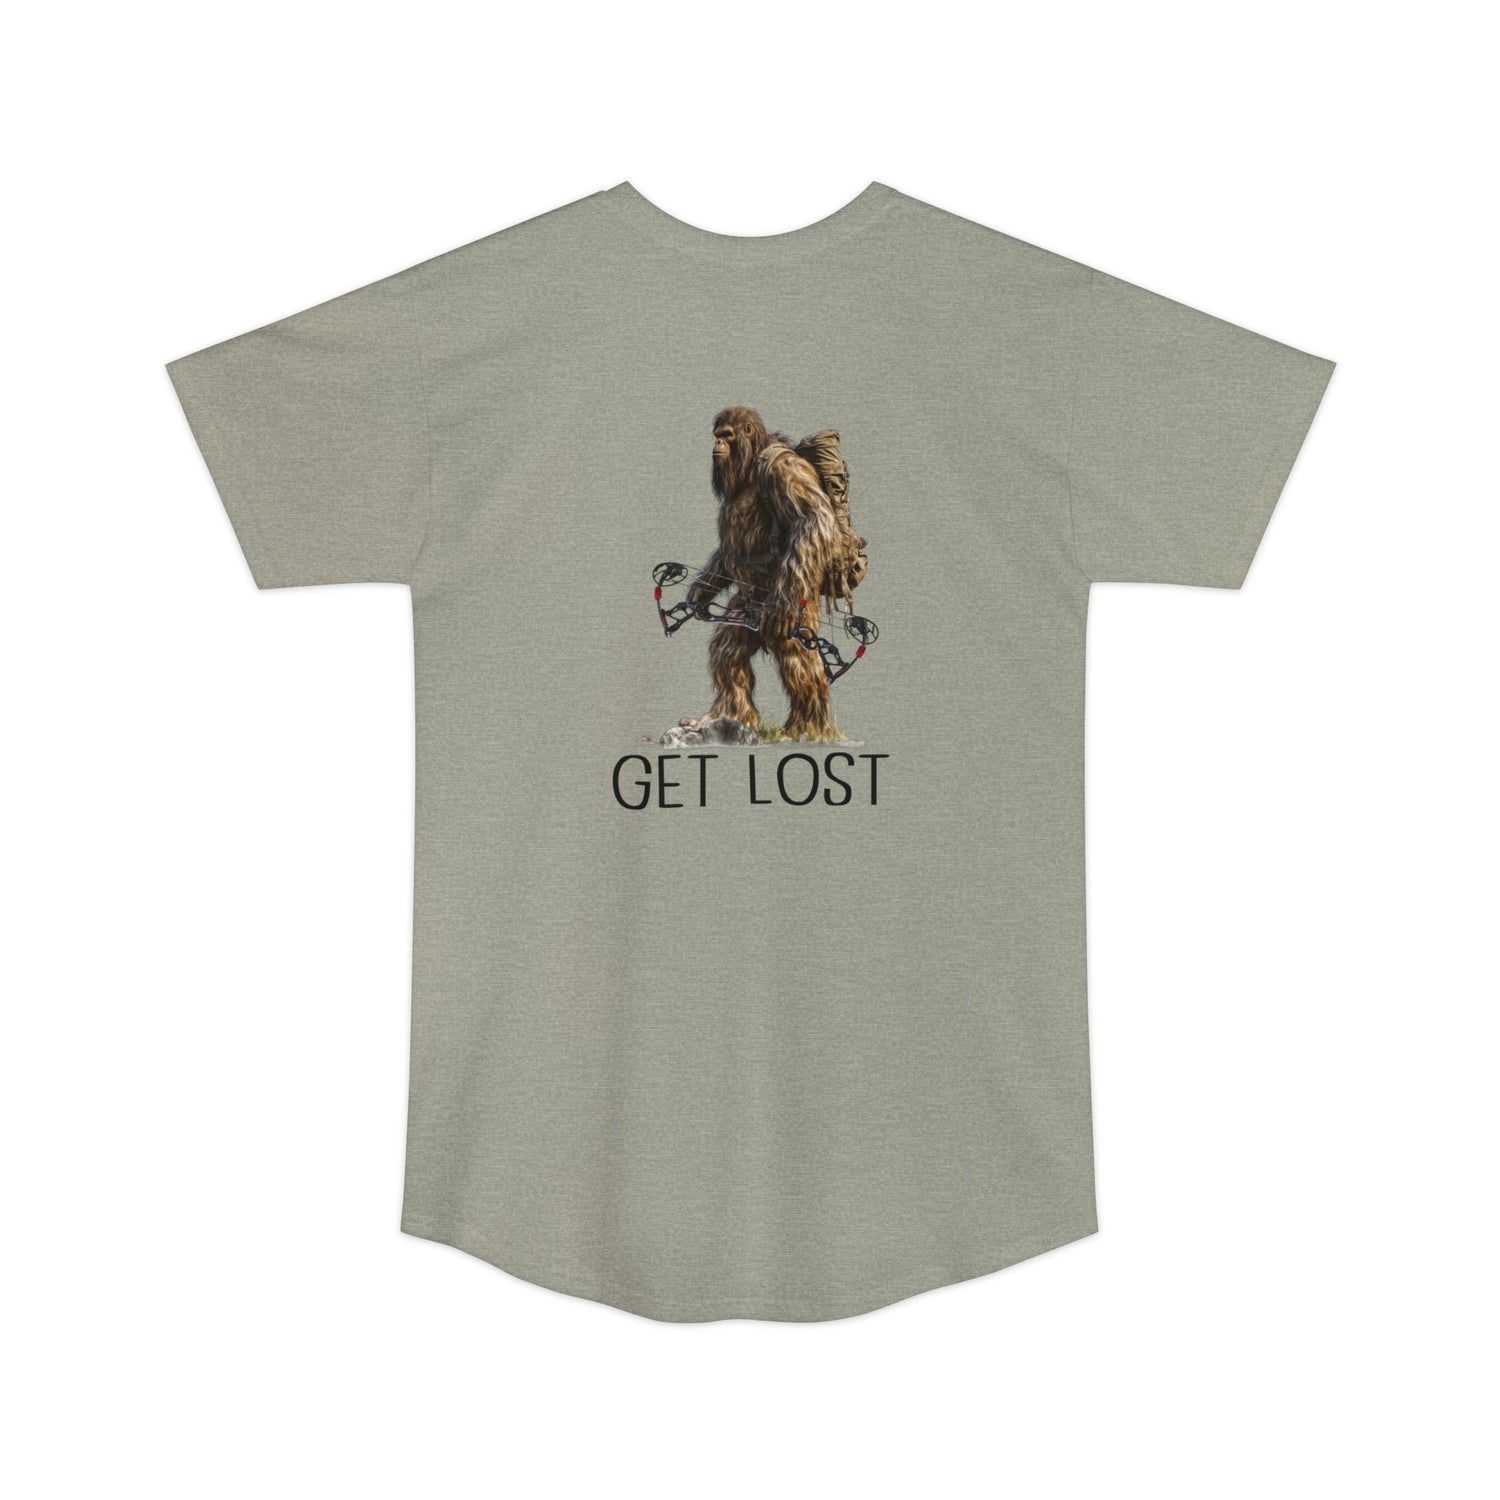 Athletic tall bowhunting t-shirt, color light grey, back design placement